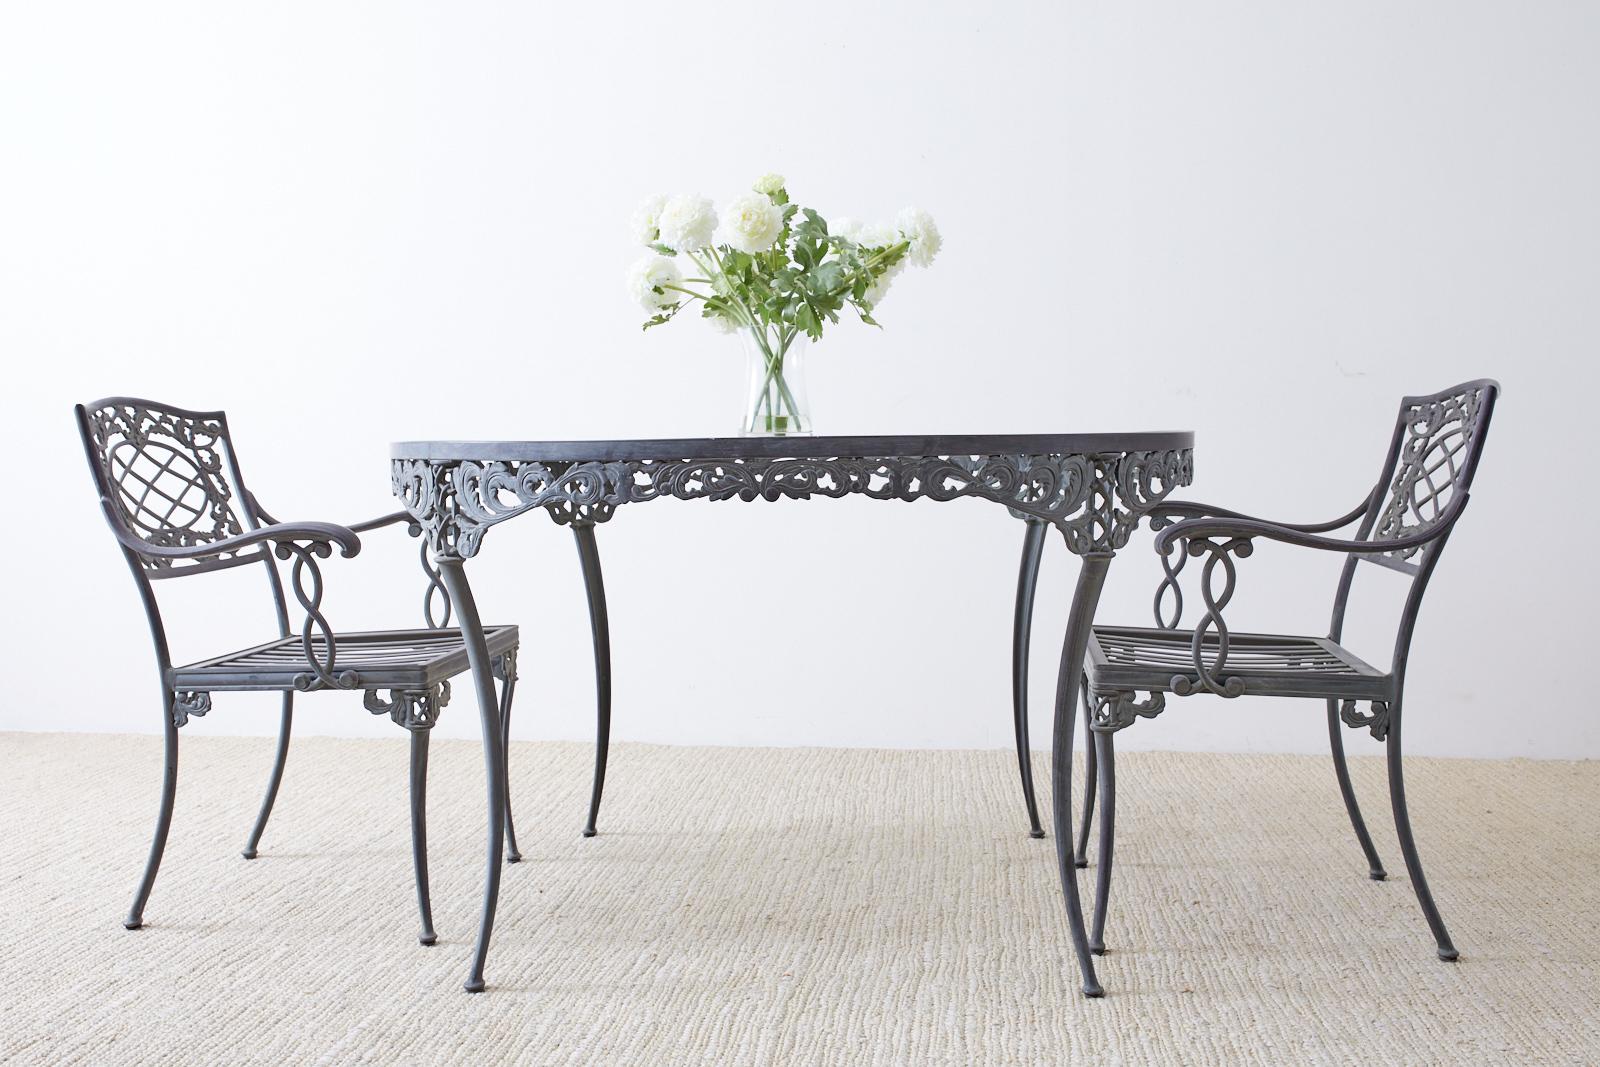 Gorgeous neoclassical style aluminum garden table or dining table made by Brown Jordan. This table features acanthus decorated aprons and is supported by graceful klismos style legs. The aluminum has a beautiful verdigris patina on the metal finish.